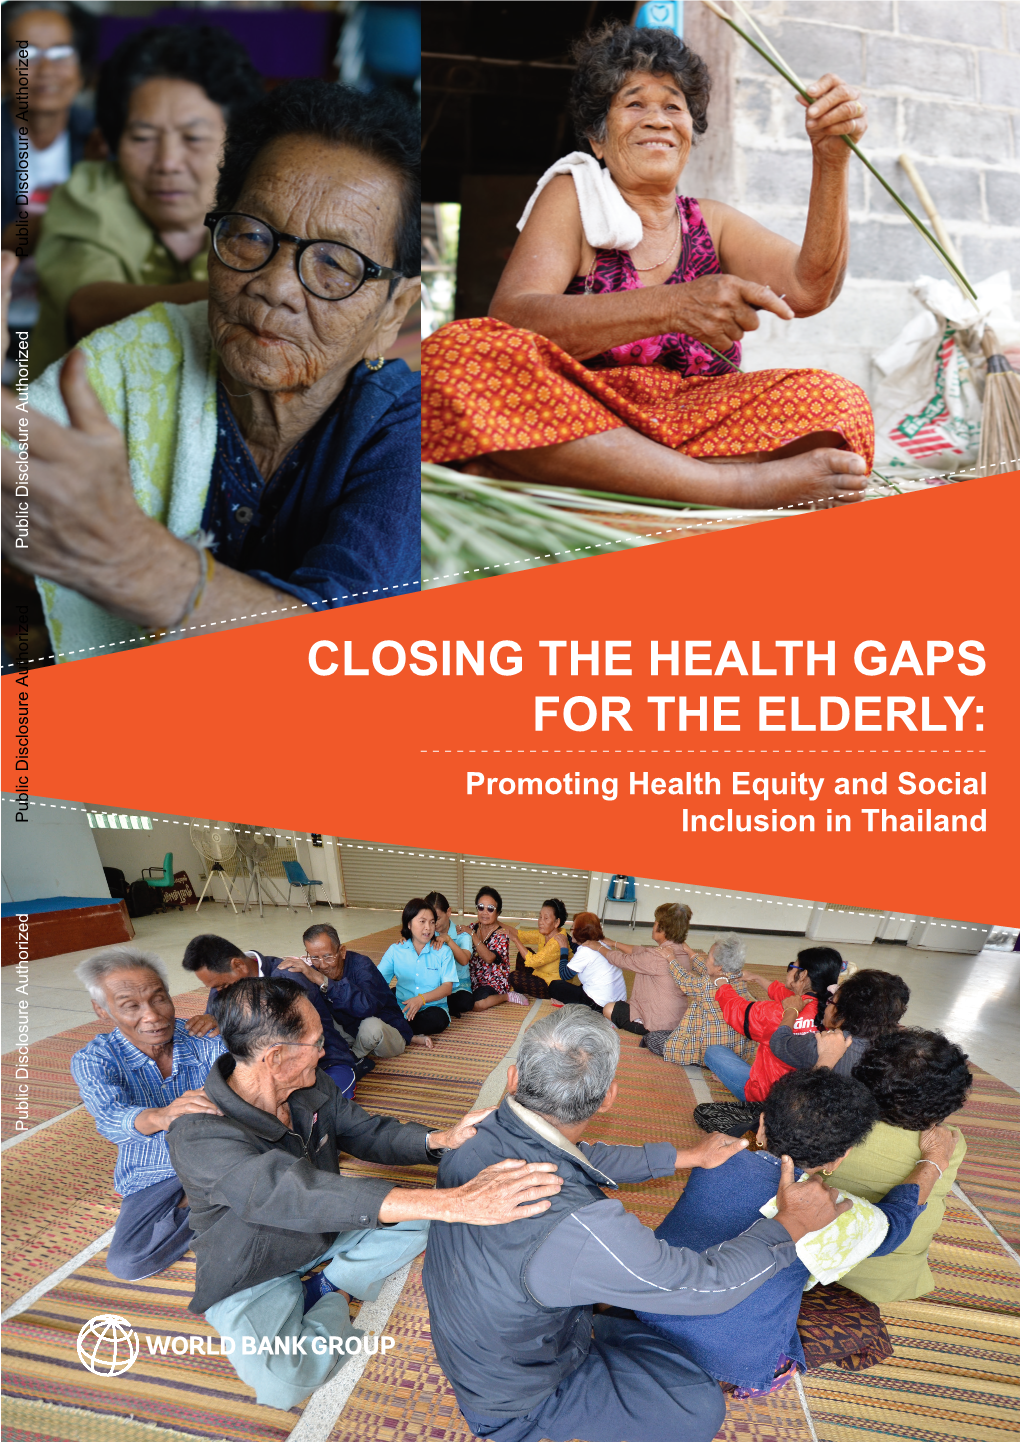 For the Elderly: Closing the Health Gaps